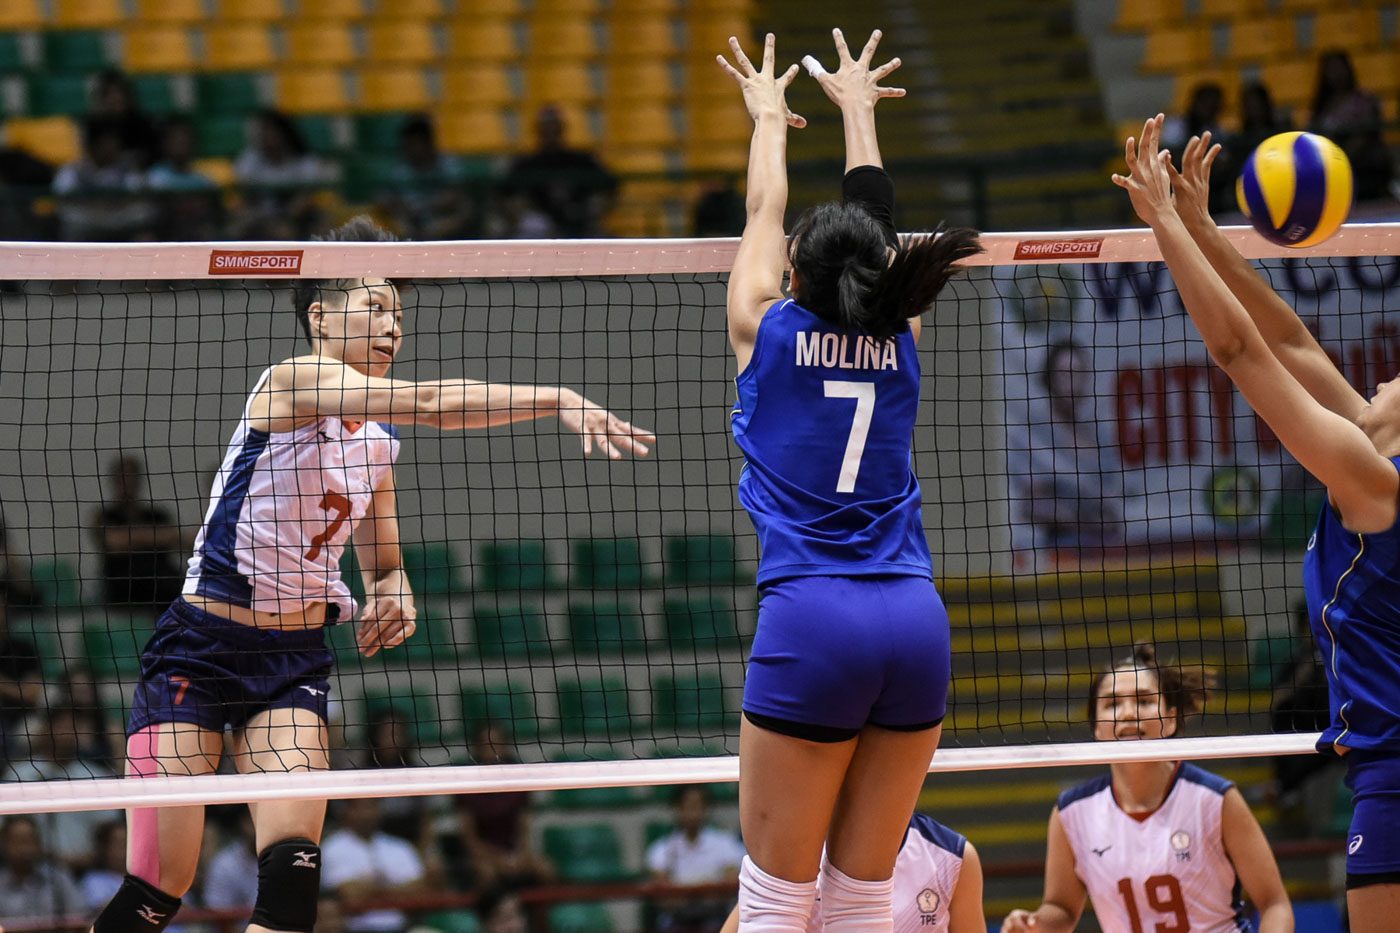 Philippines falls to Chinese Taipei in Asian Senior Women’s Volleyball classification round